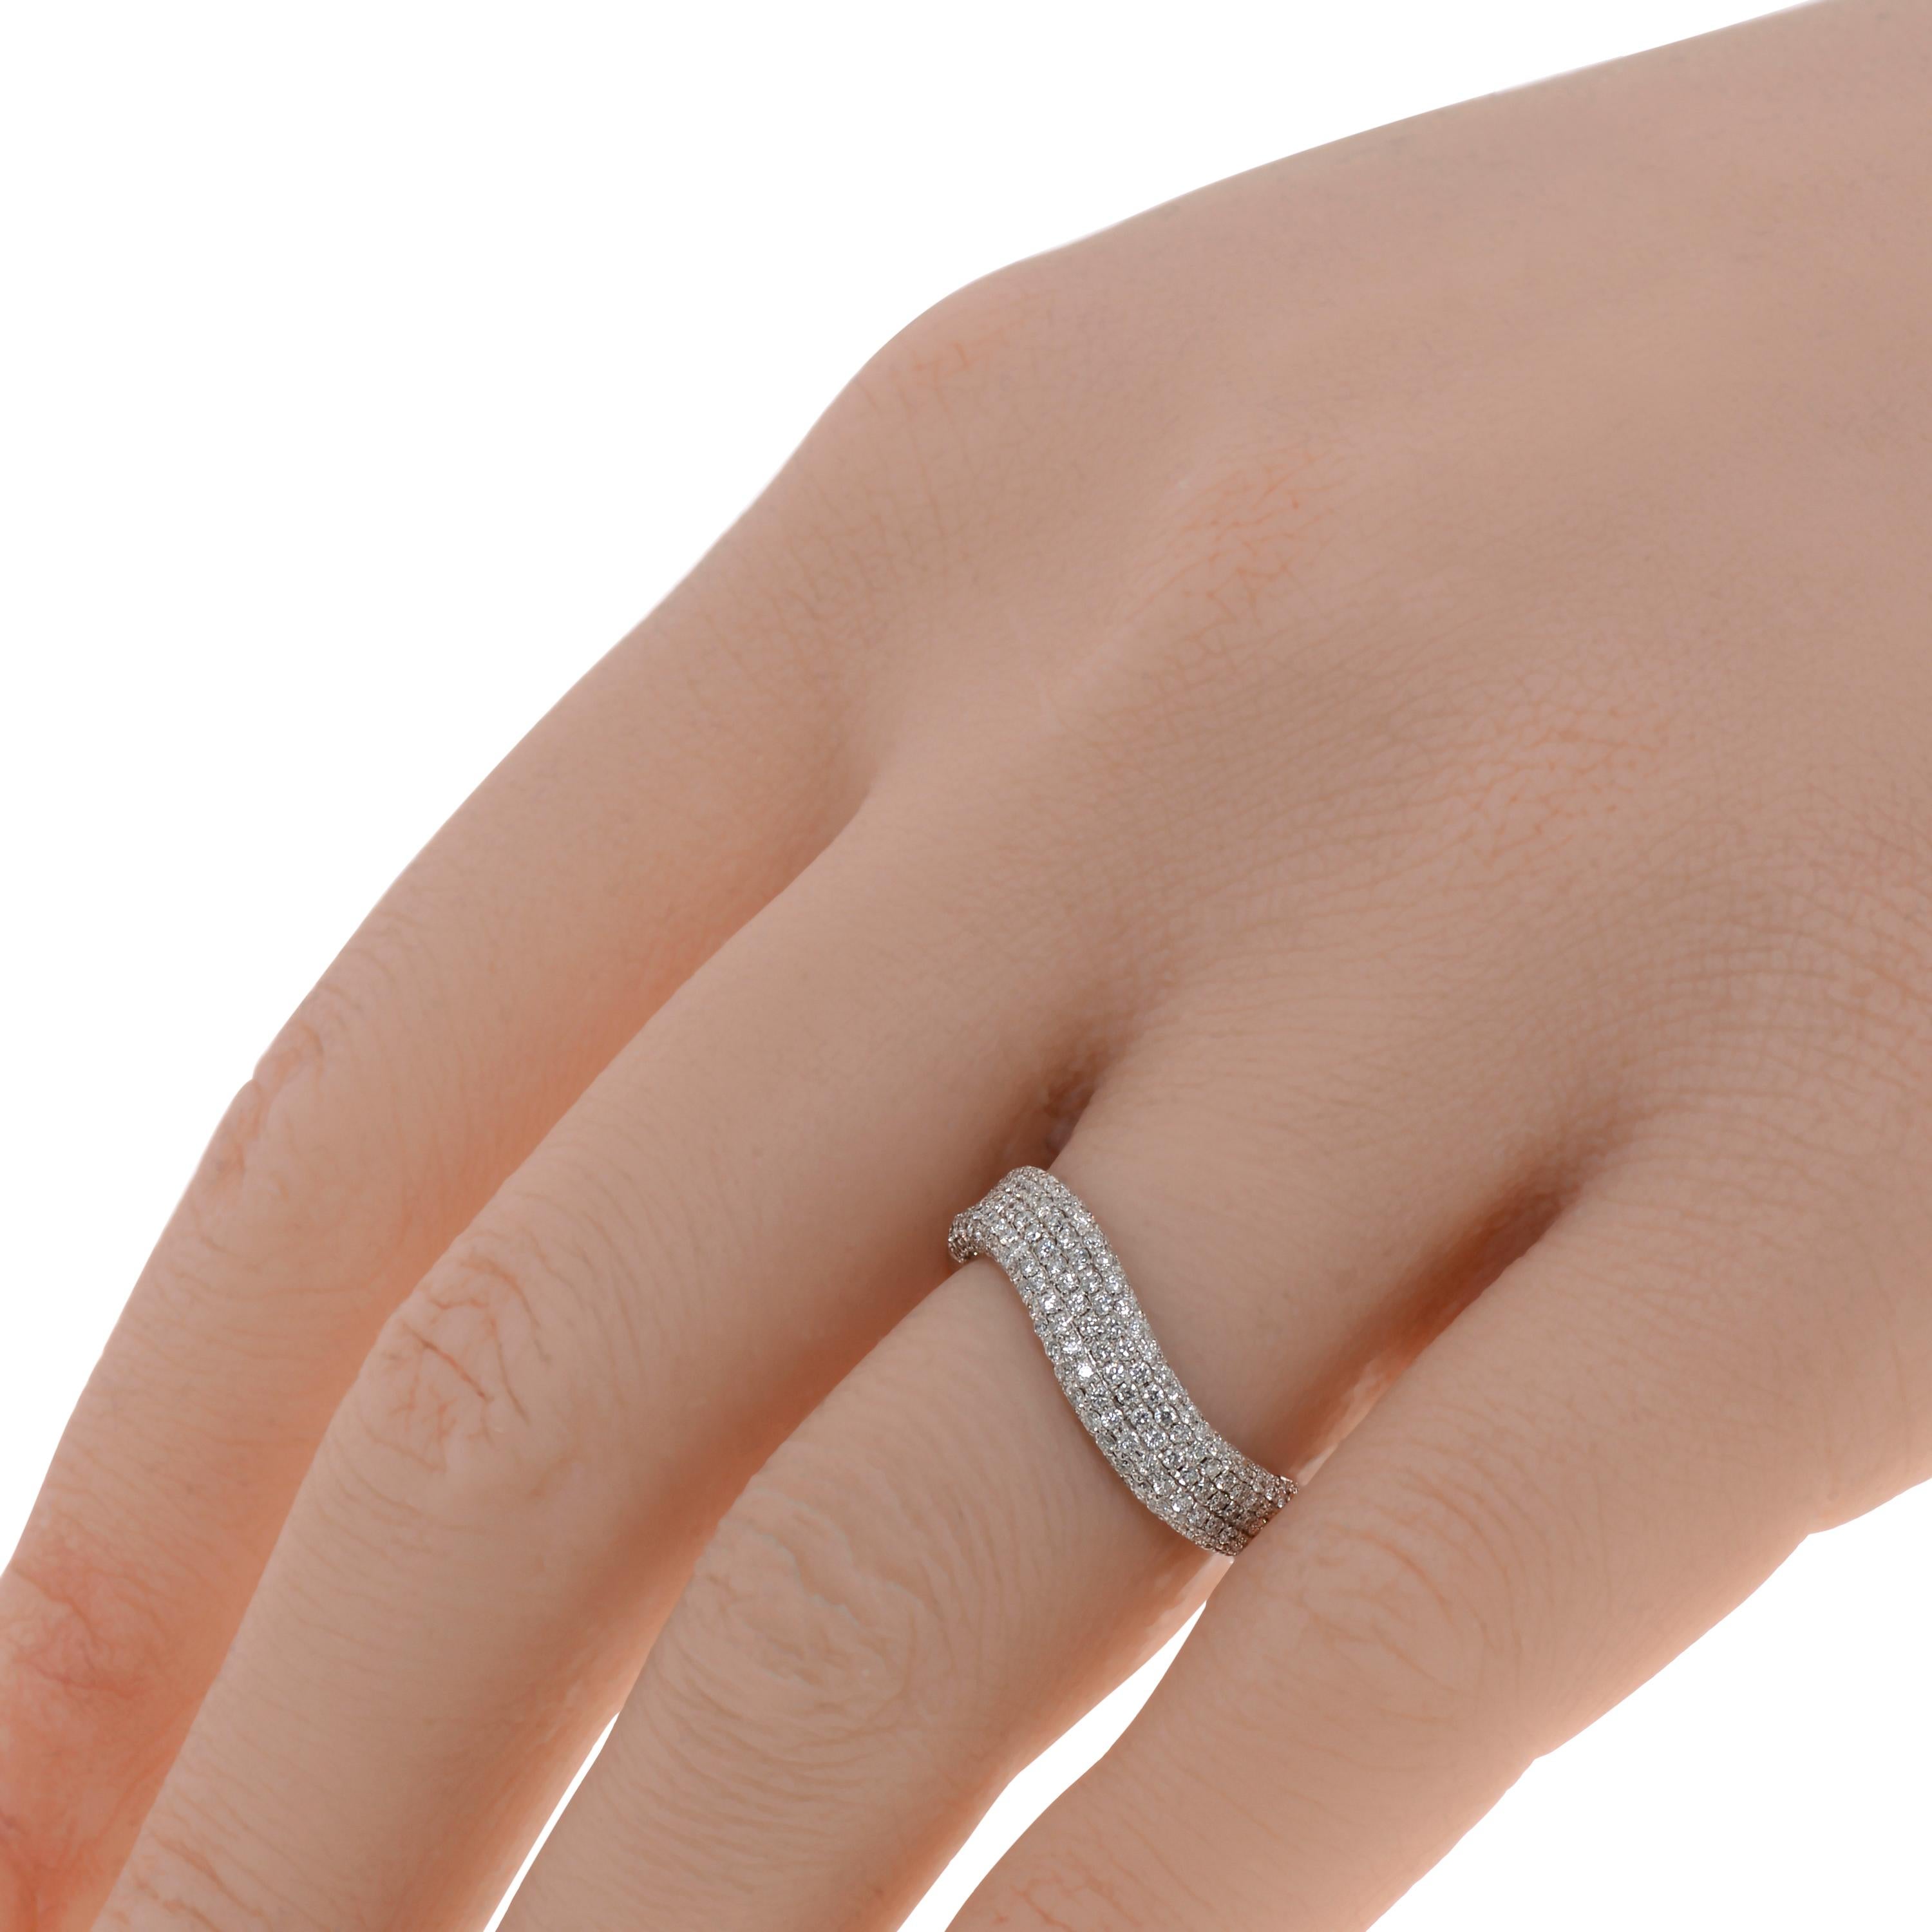 This contemporary Piero Milano 18K White Gold Curved Ring features layers of striking diamonds 0.65ct. tw. lining a curved white gold band. The ring size is 6.25 (52.5). The Band Width is 4.5mm. The Weight is 4.1g. Diamond Color: G-H. Diamond